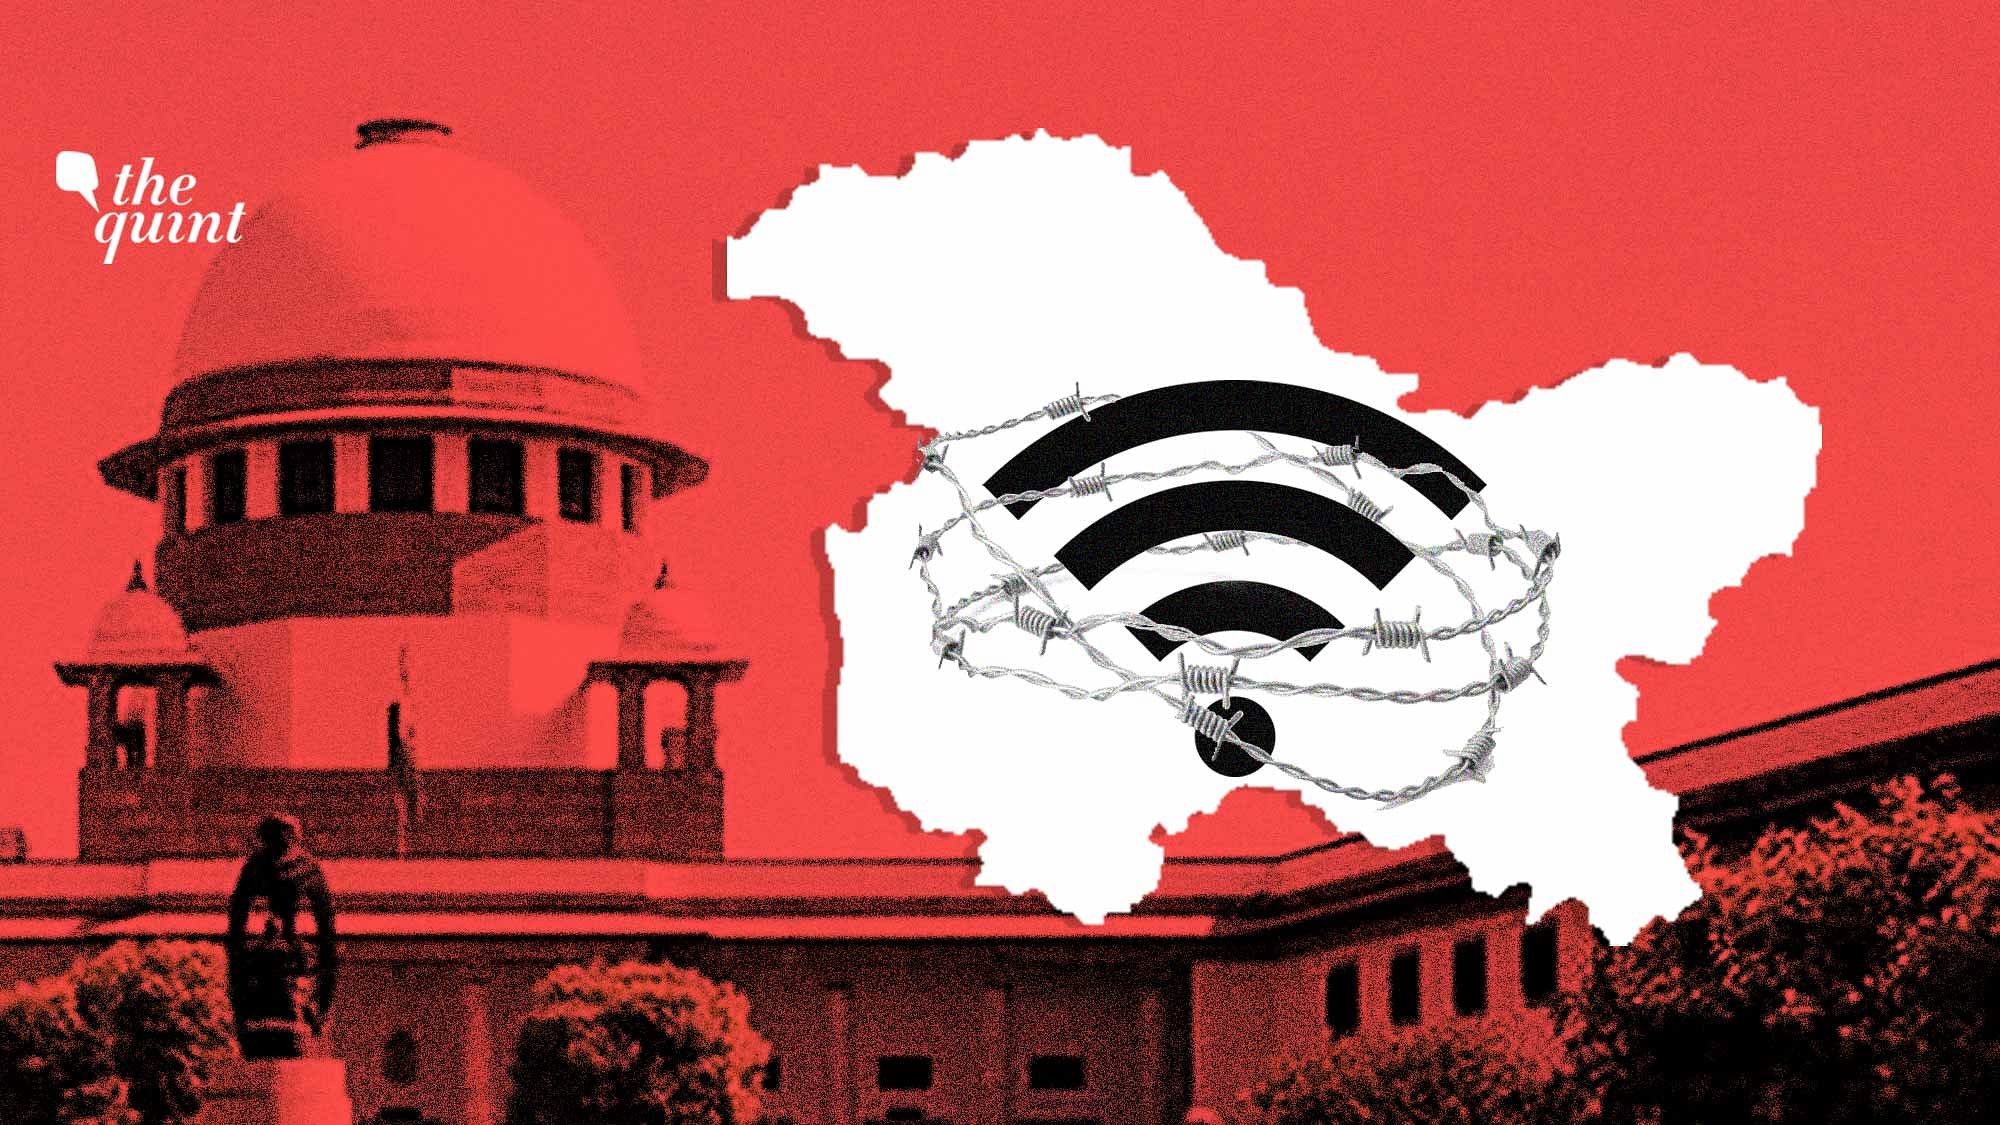 Internet services in Jammu &amp; Kashmir have been suspended since 5 August